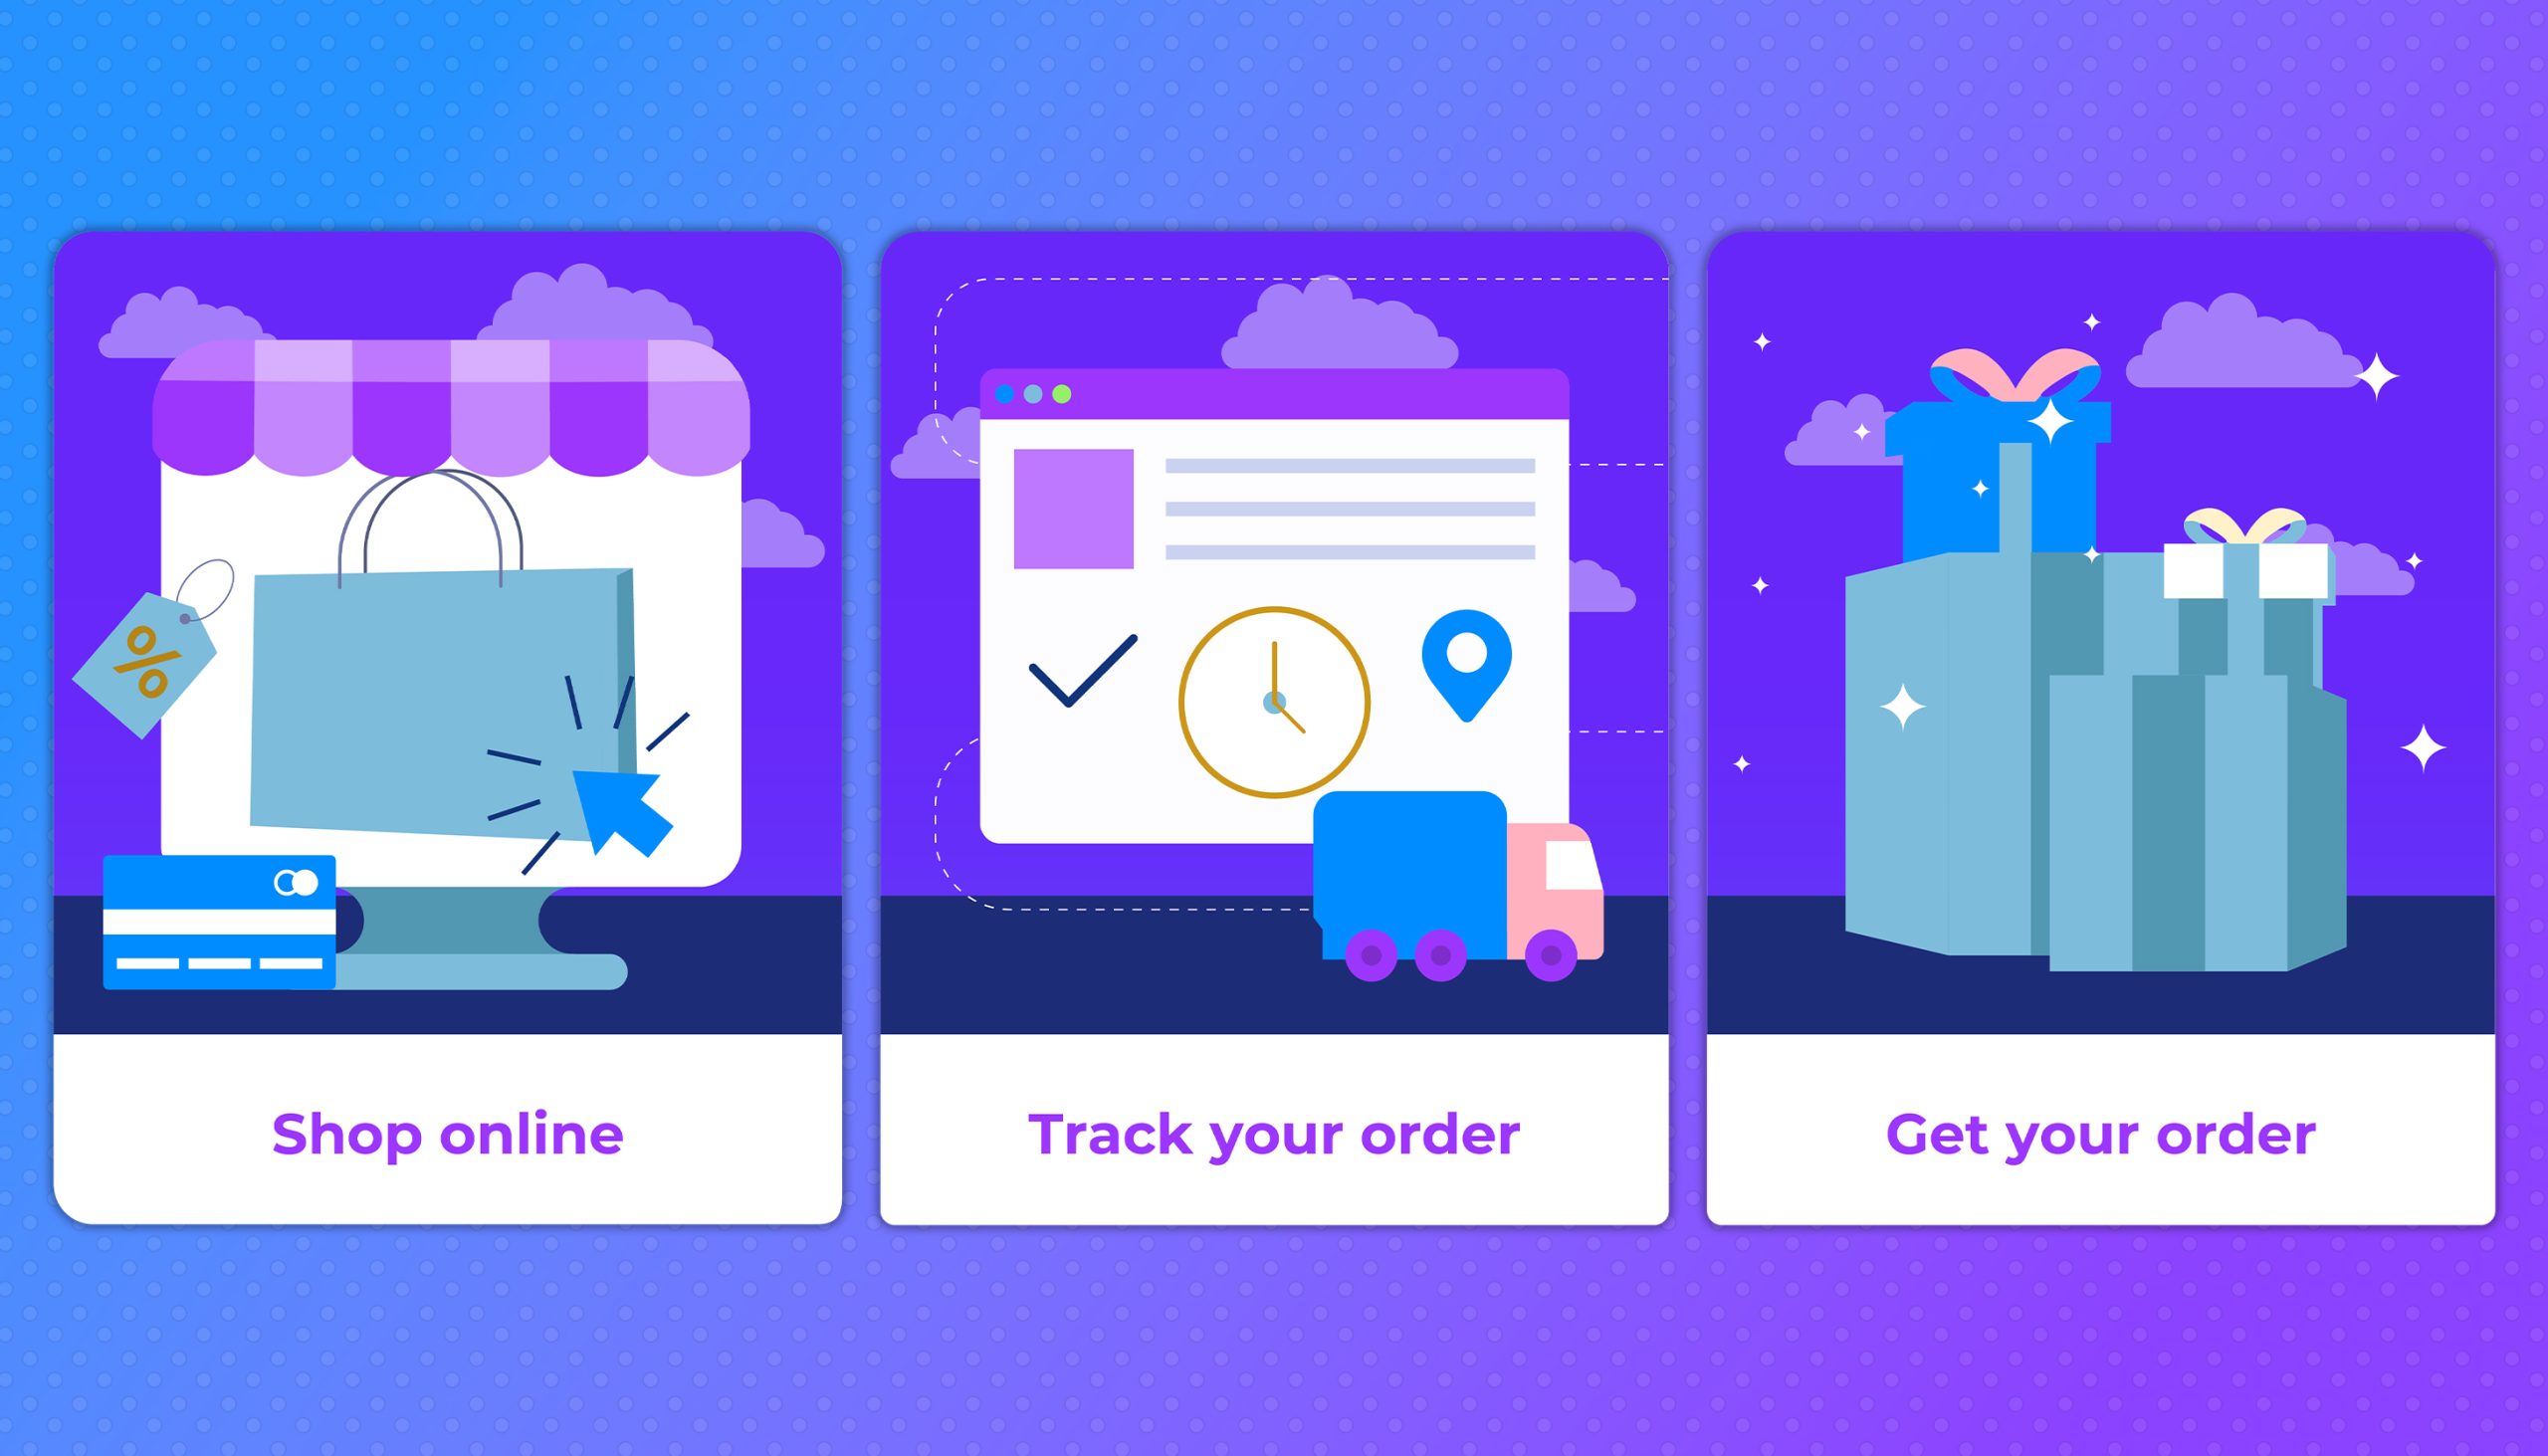 Conversational commerce for your checkout experience